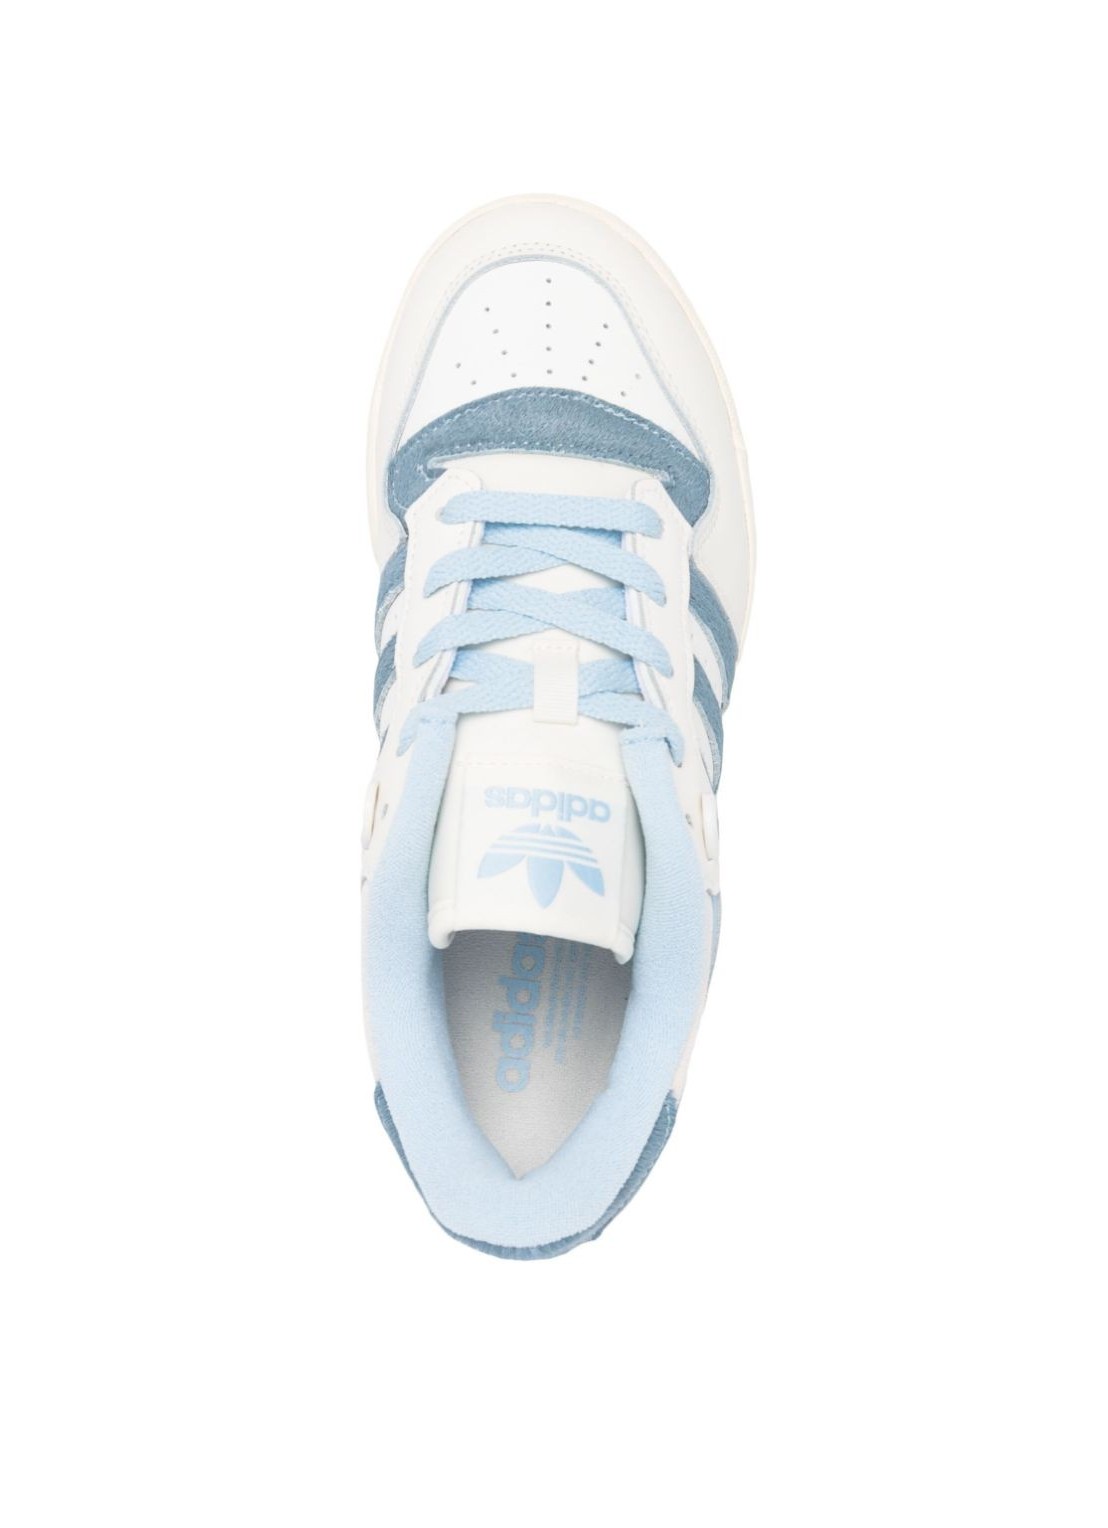 adidas originals rivalry 86 low - ie7137 owhite clesky orbgry Talla 41 1/3